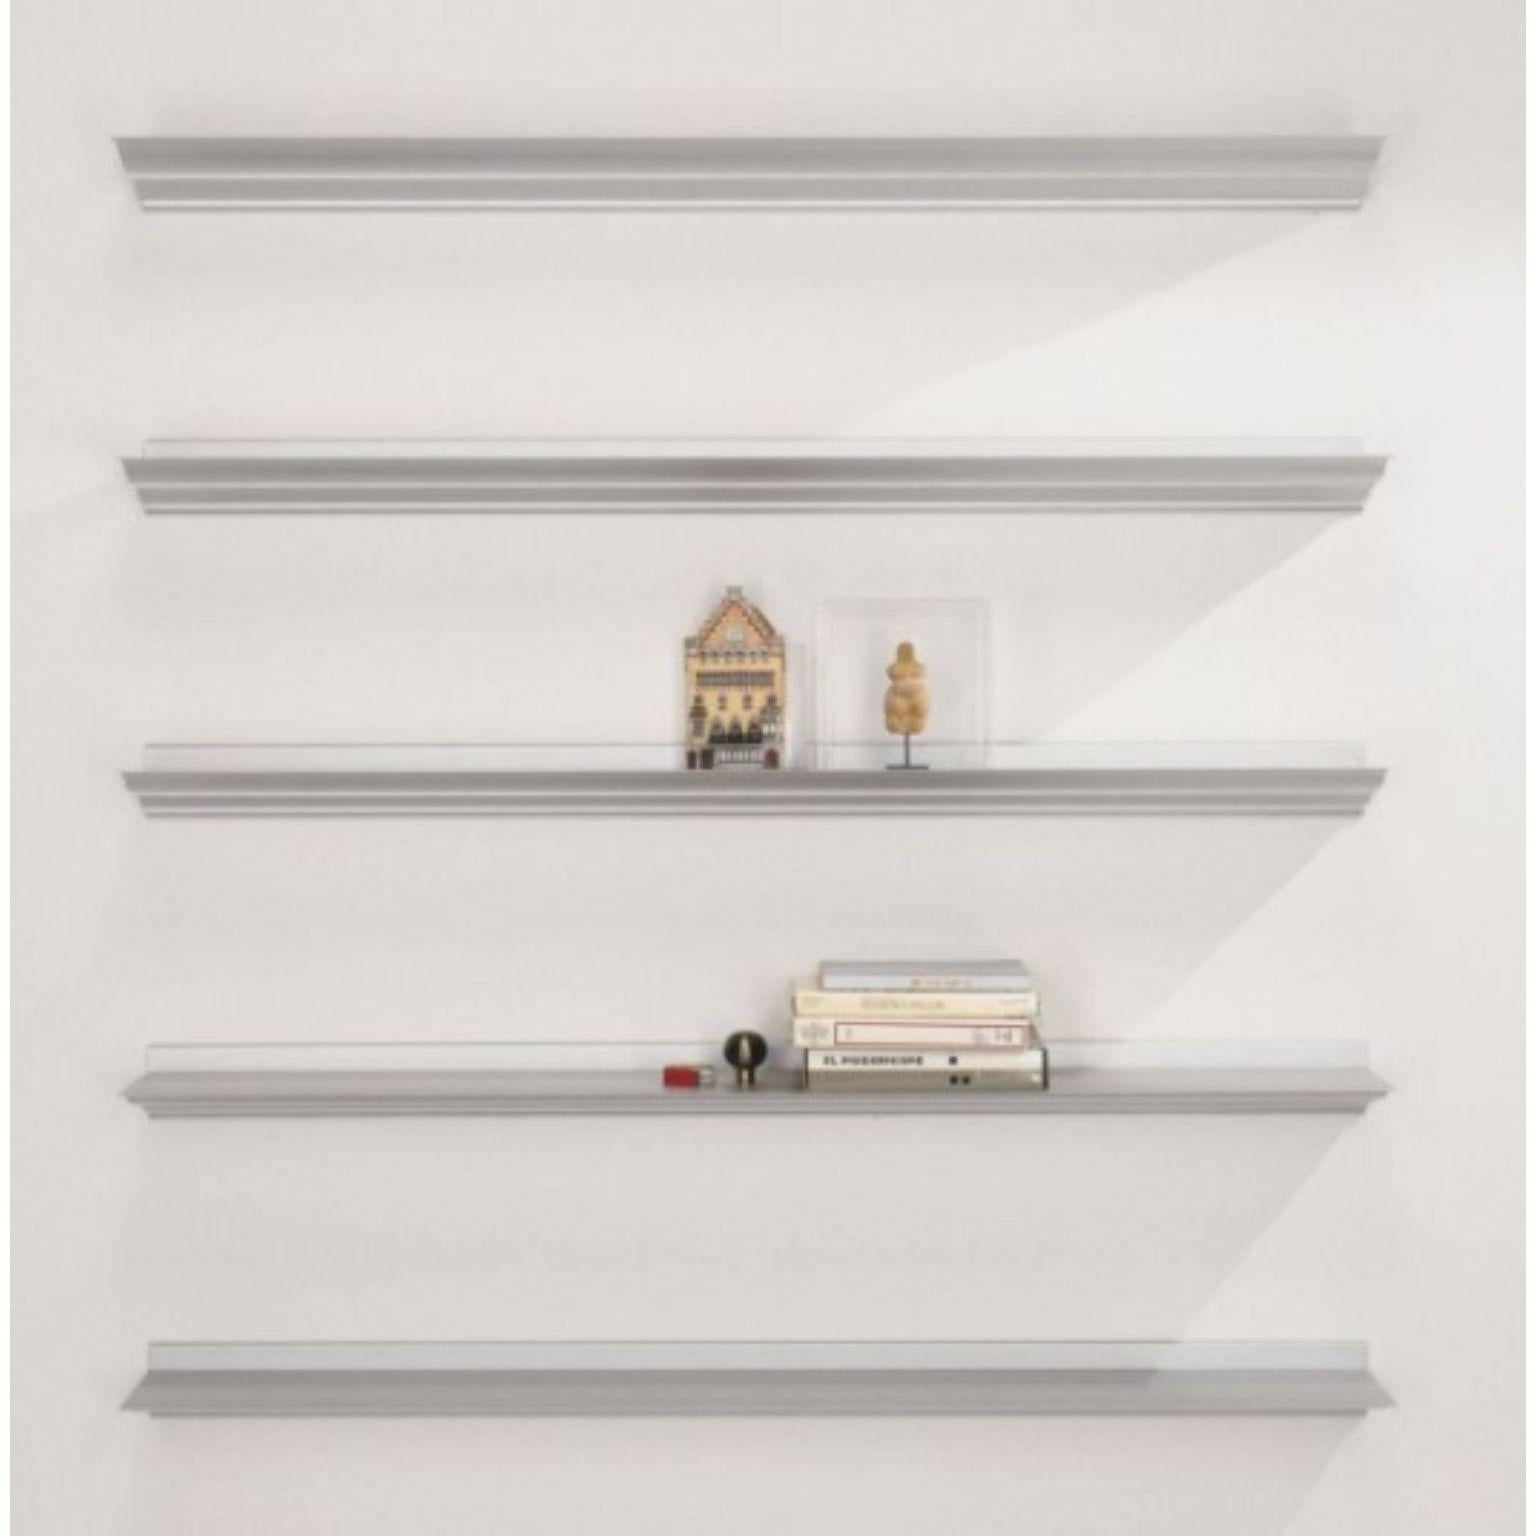 Cornisa Shelfs by Lluís Clotet & Oscar Tusquets
Dimension: D 26 x W 250 x H 6 cm
Having been in our catalogue for nearly 50 years, the Cornisa shelving is one our most functional designs. With depths of 15cm or 26cm, its ideal for kitchens,